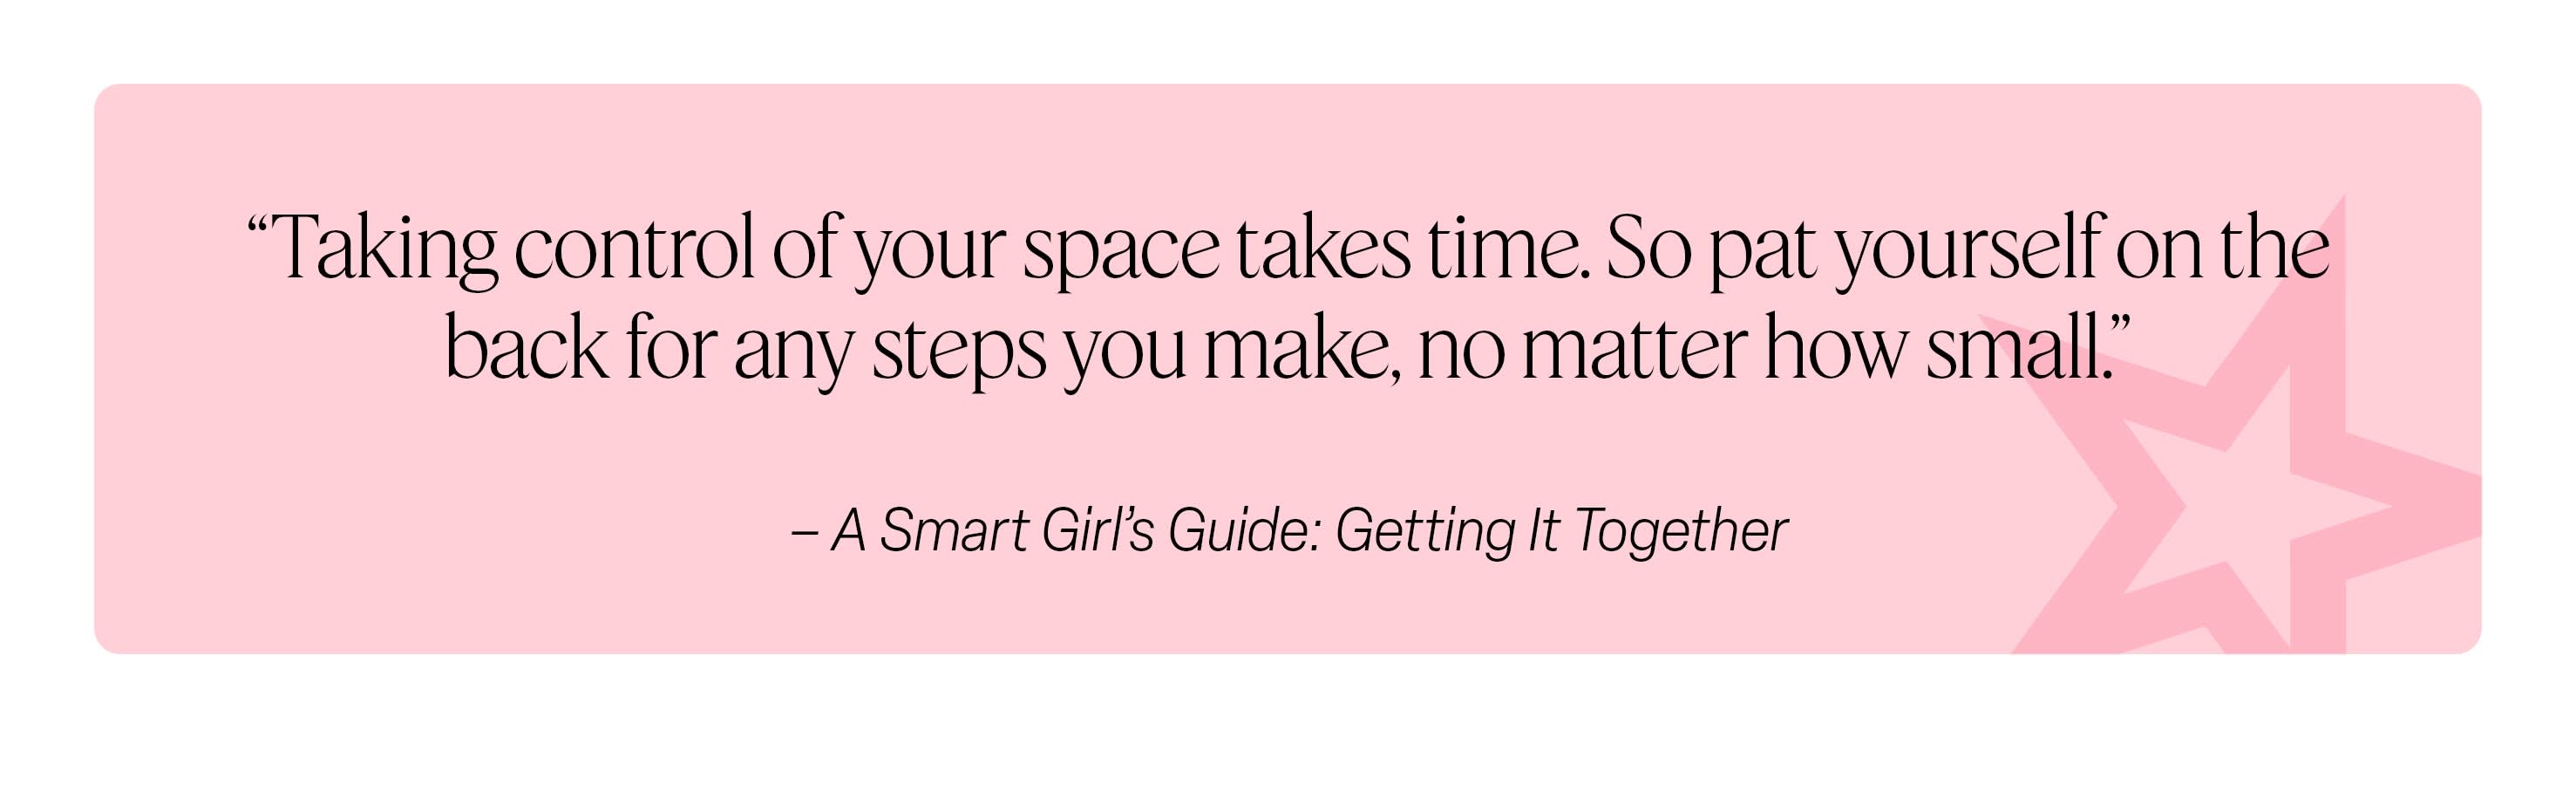 Quote from A Smart Girl's Guide: Getting it Together